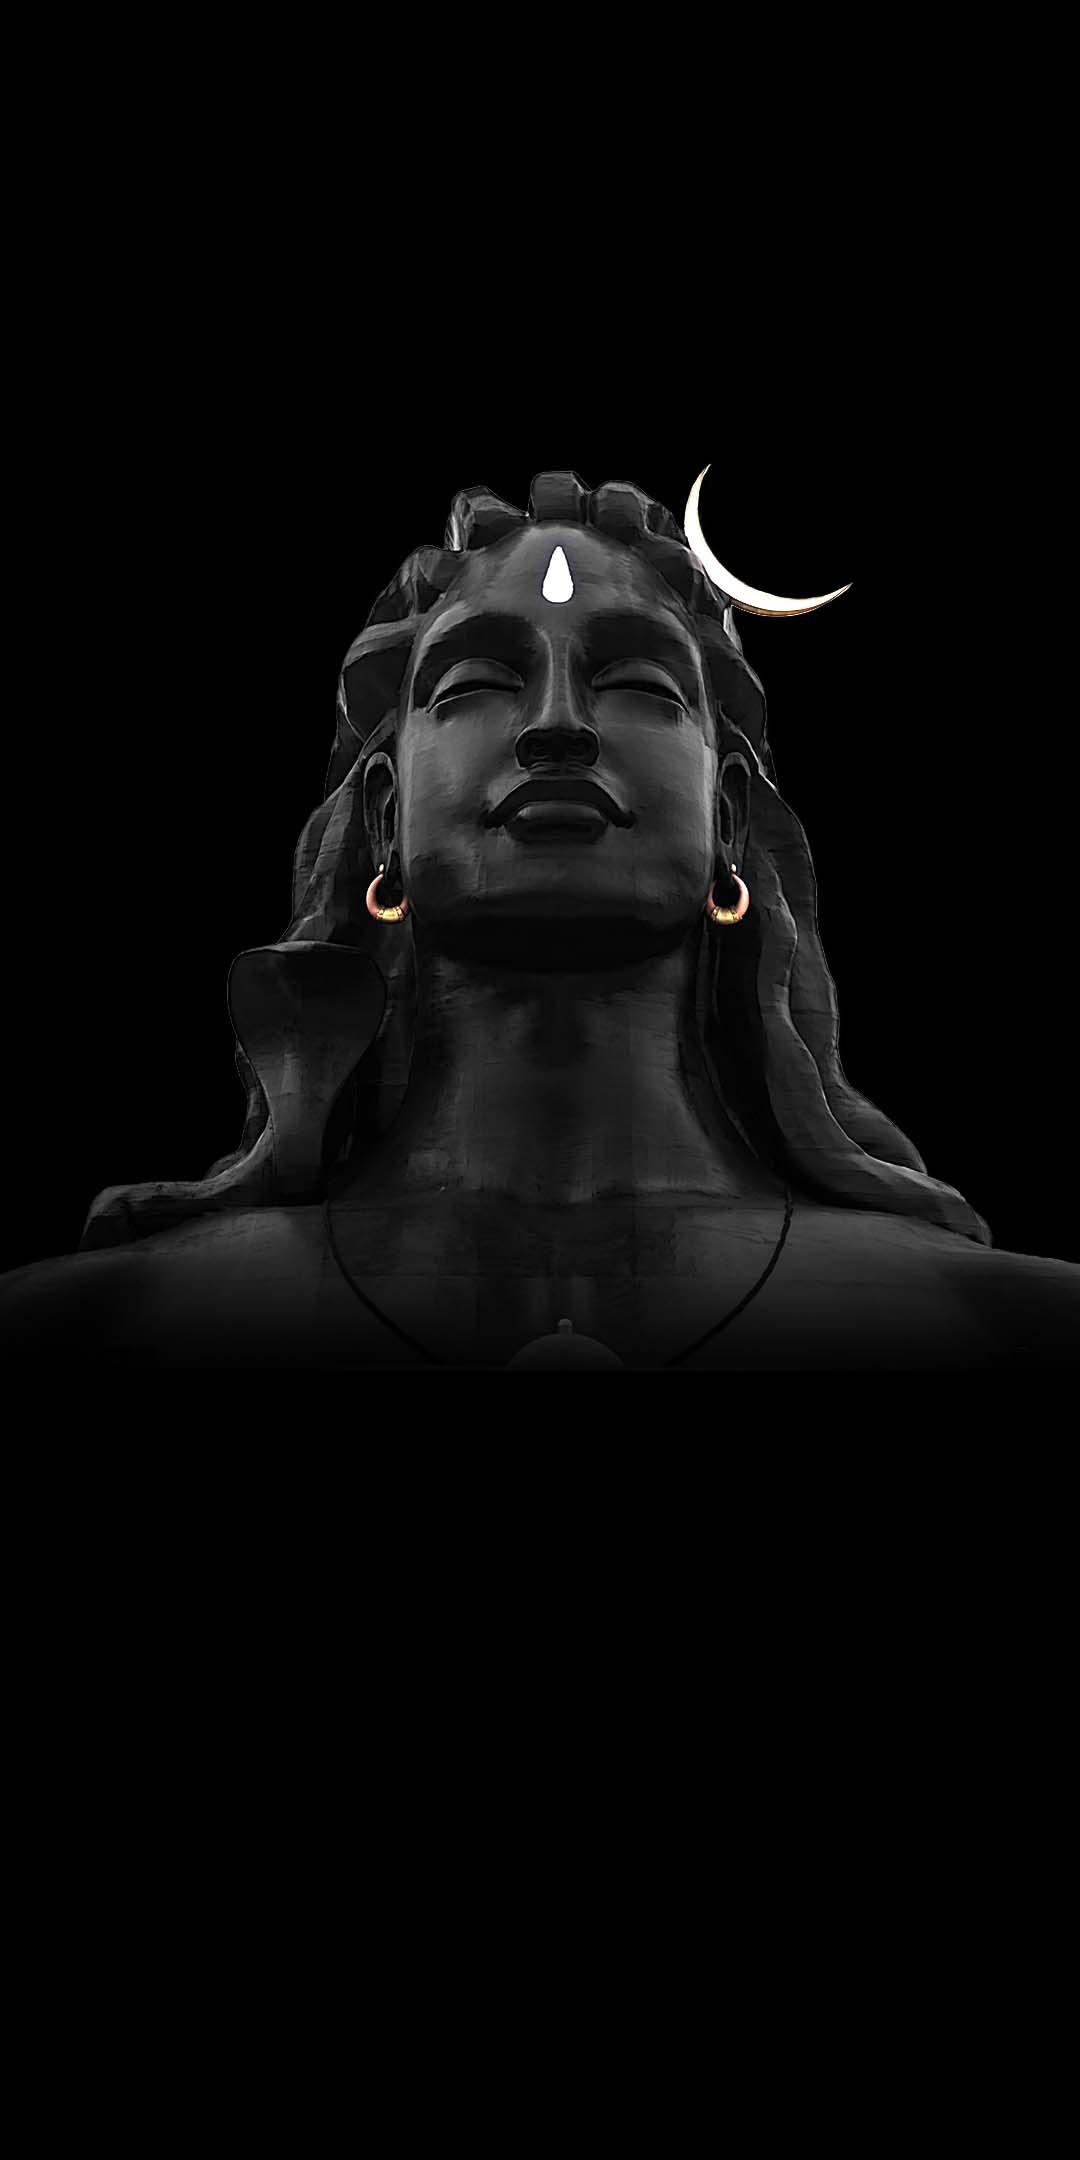 lord shiva animated wallpapers for mobile